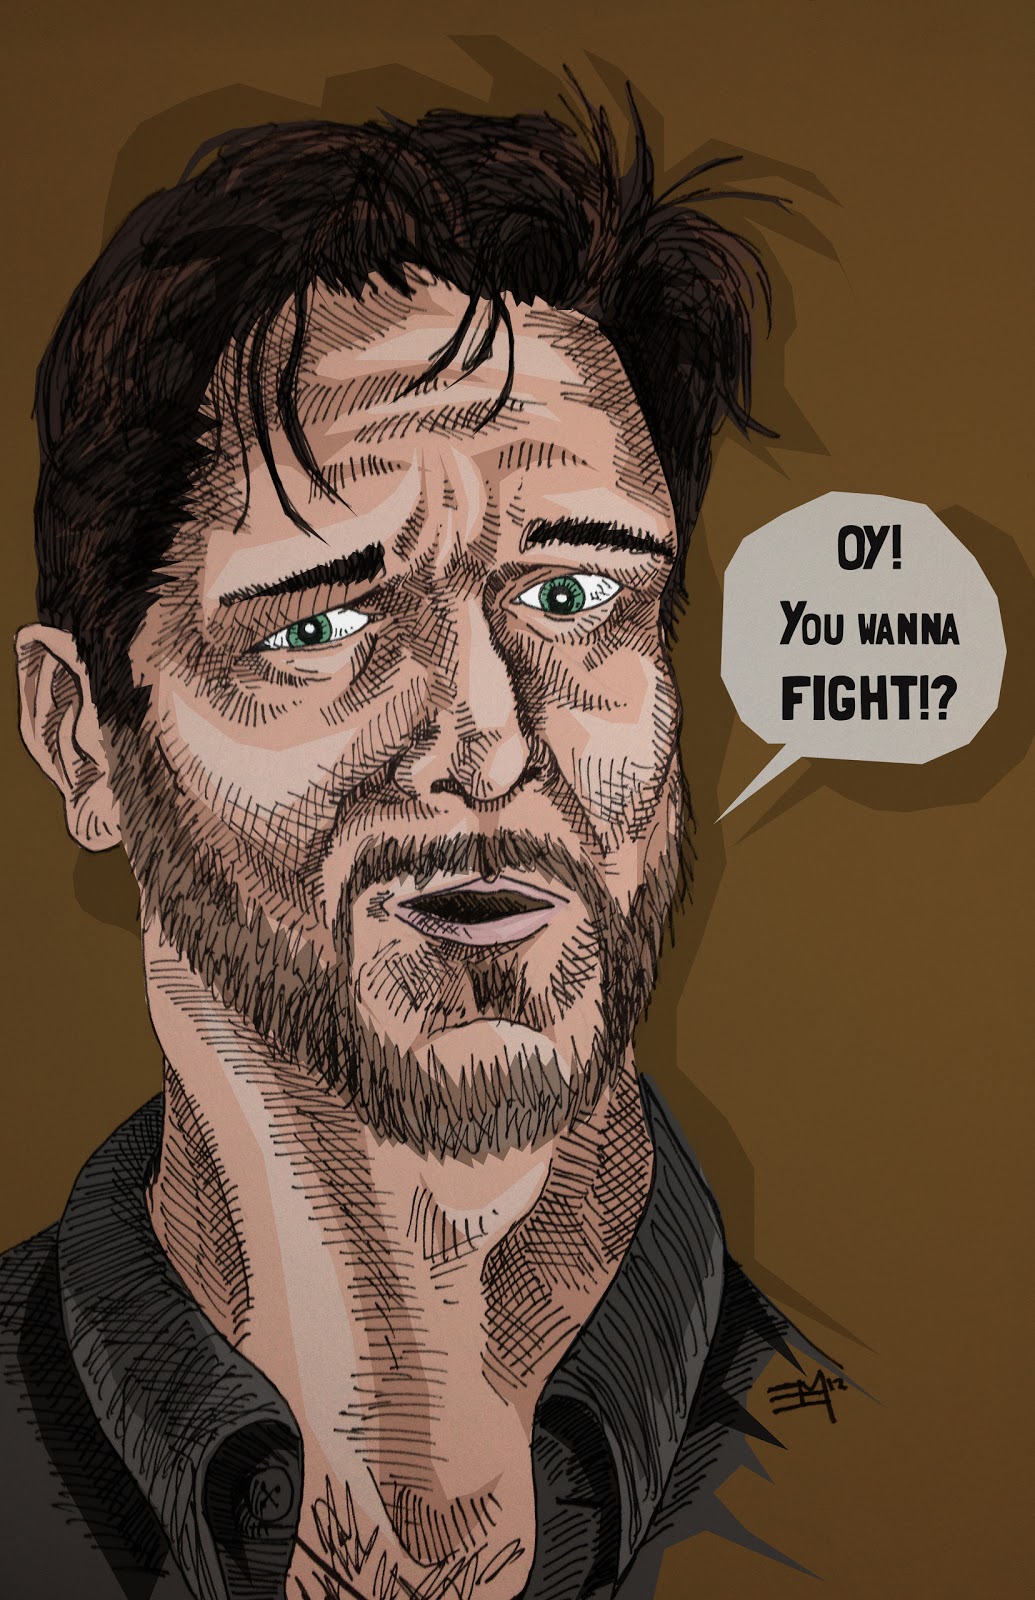 http://1.bp.blogspot.com/-suhpTSSBvX8/T4YlueIyGhI/AAAAAAAAAB8/01QwHW97YLo/s1600/russell+crowe+background+with+lines.jpg